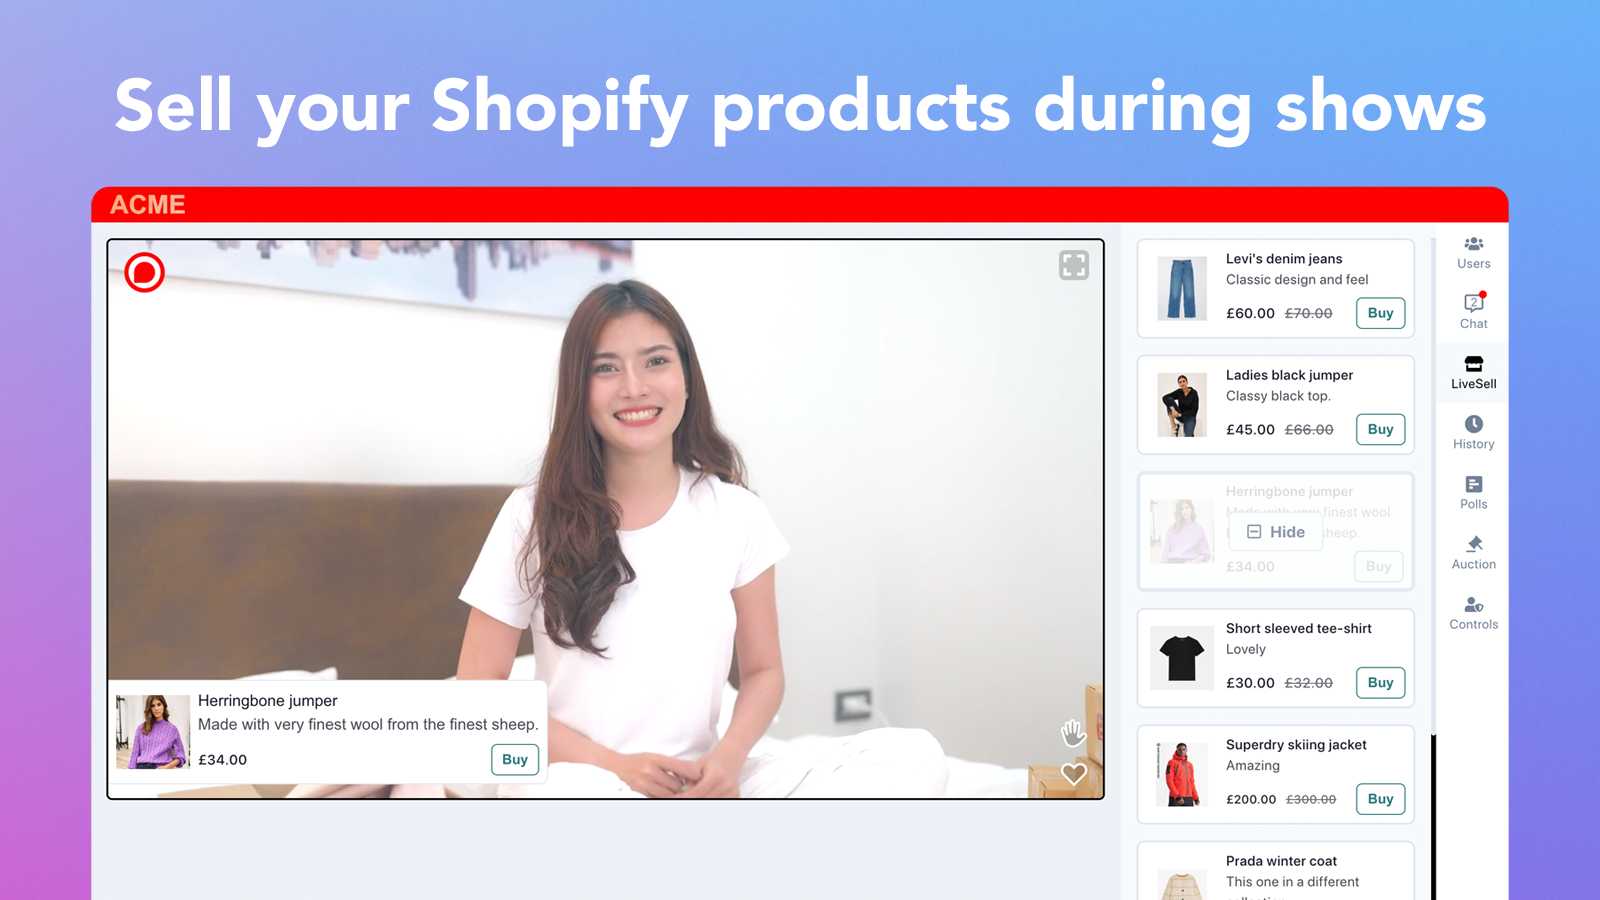 Sell products to customers during live interactive video events